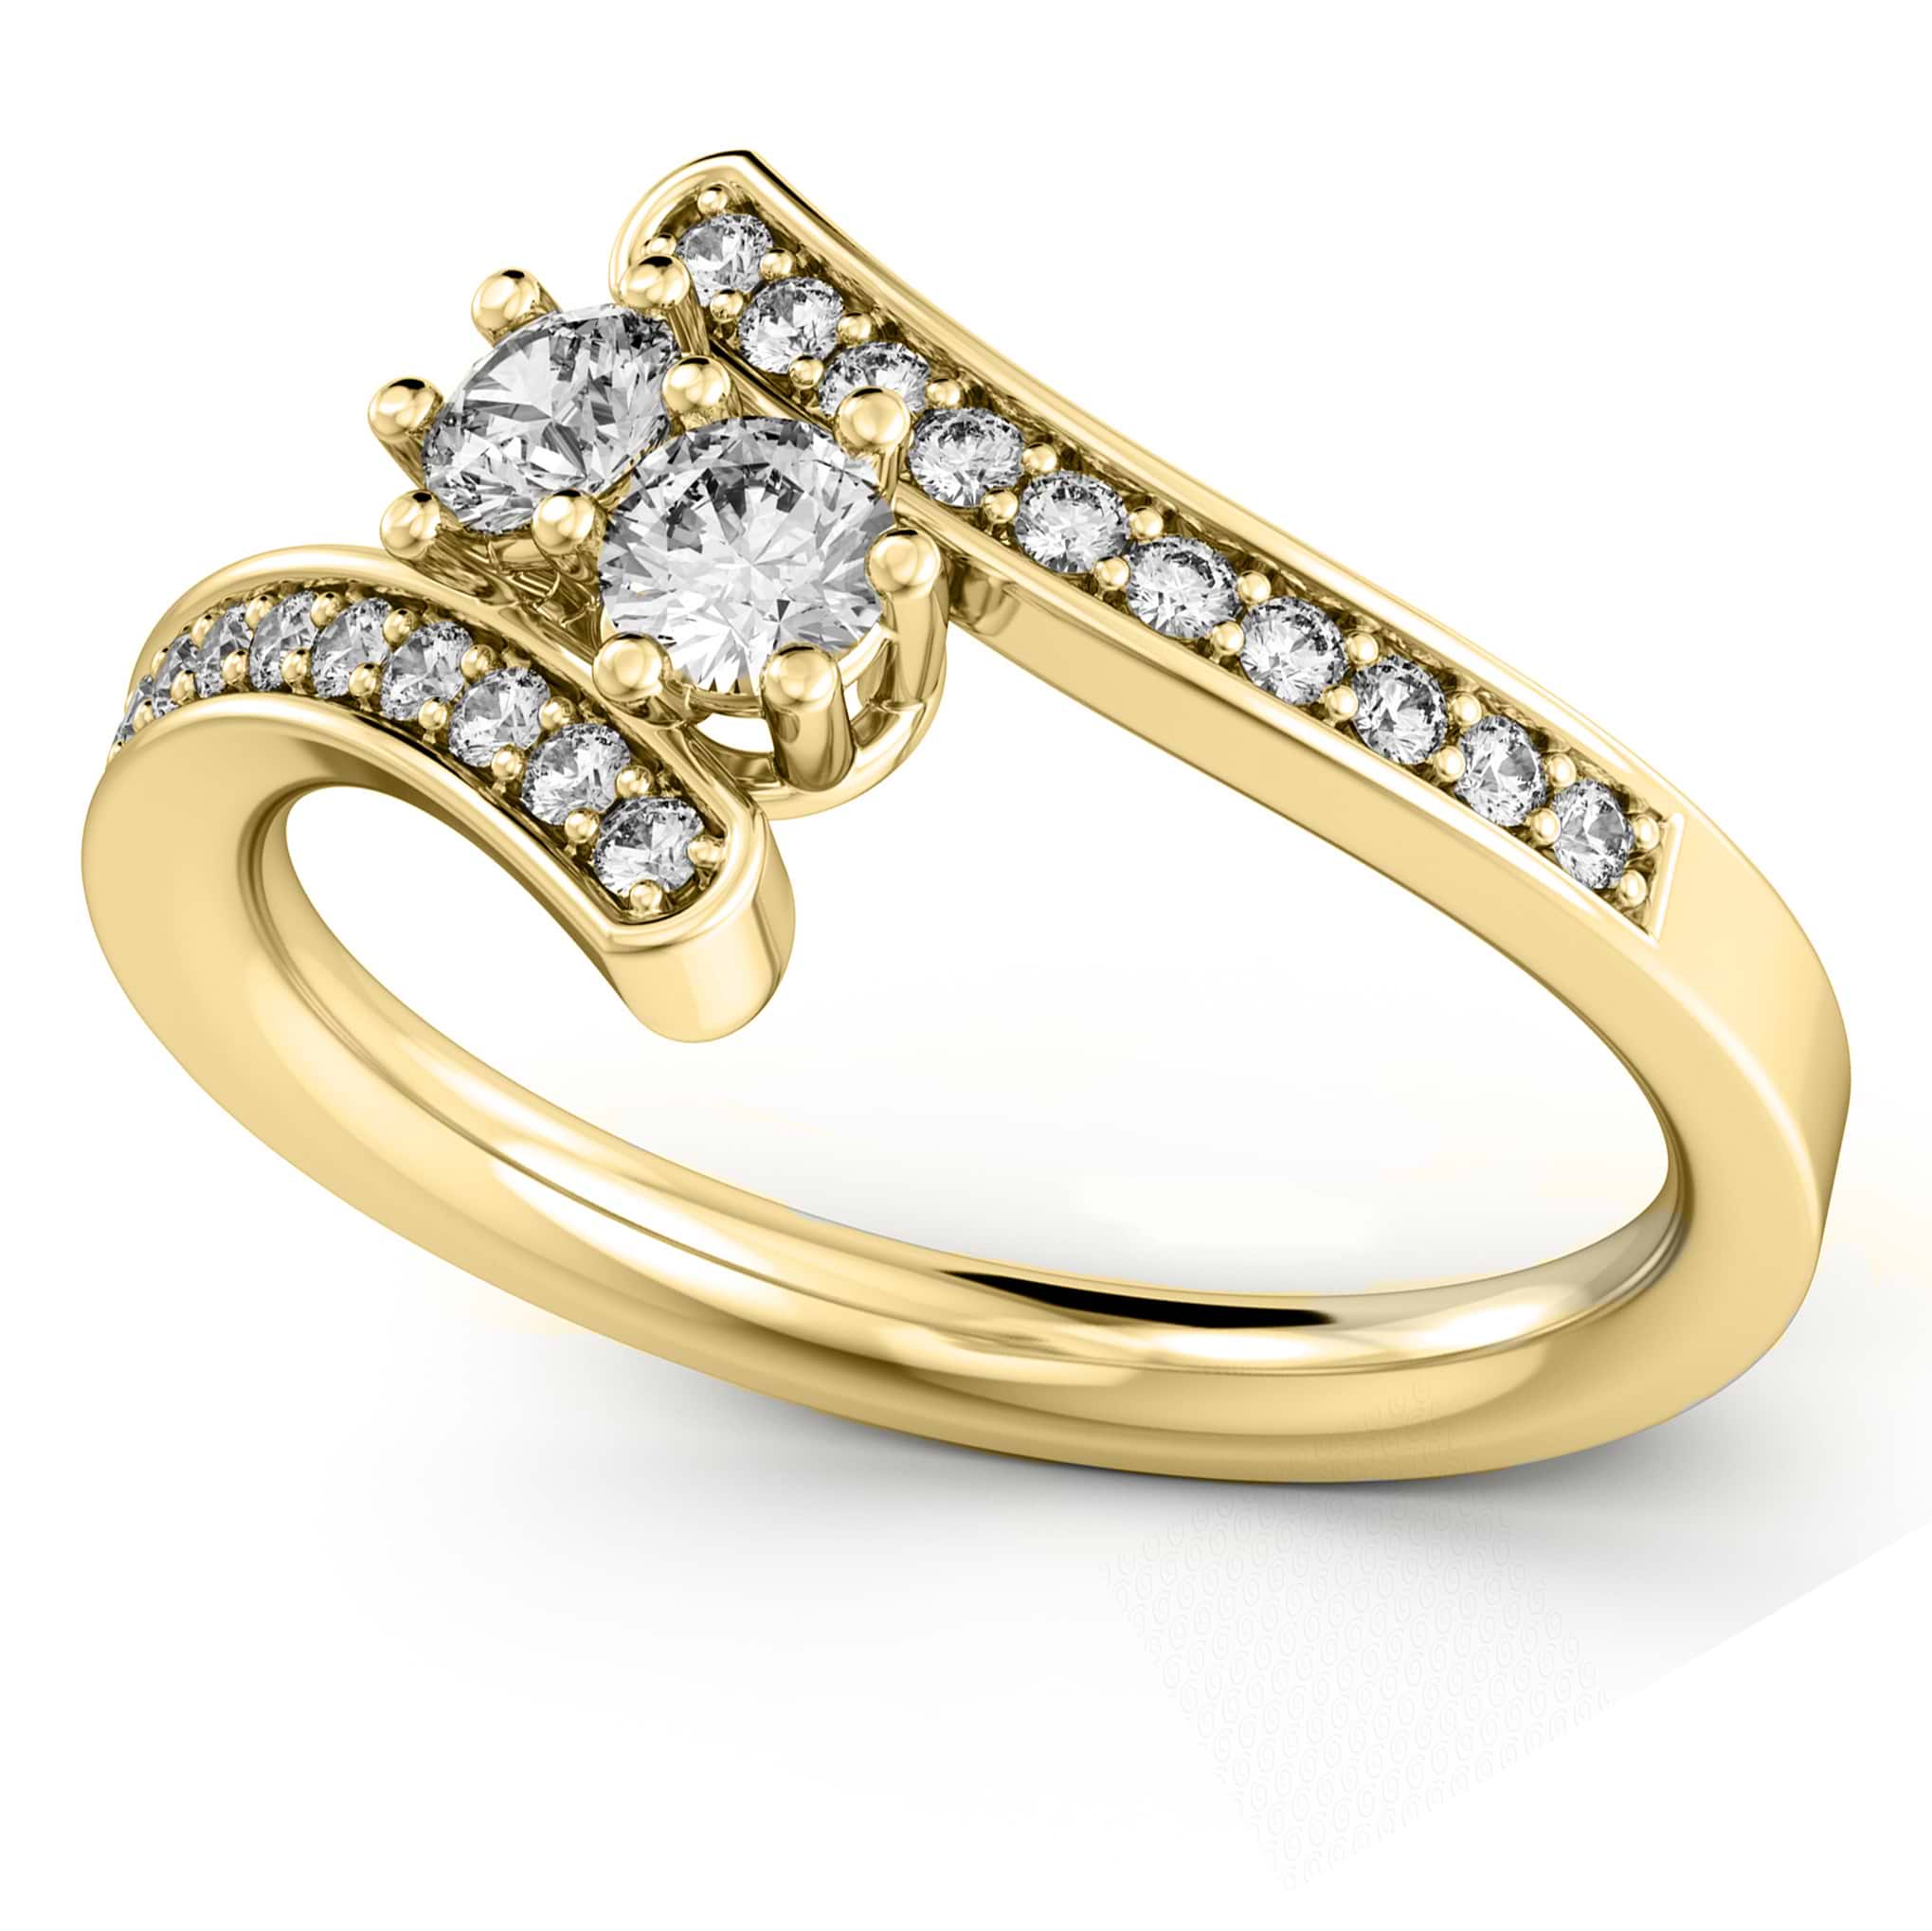 Diamond Accented Two Stone Curved Tension Ring 18k Yellow Gold (0.70ct)